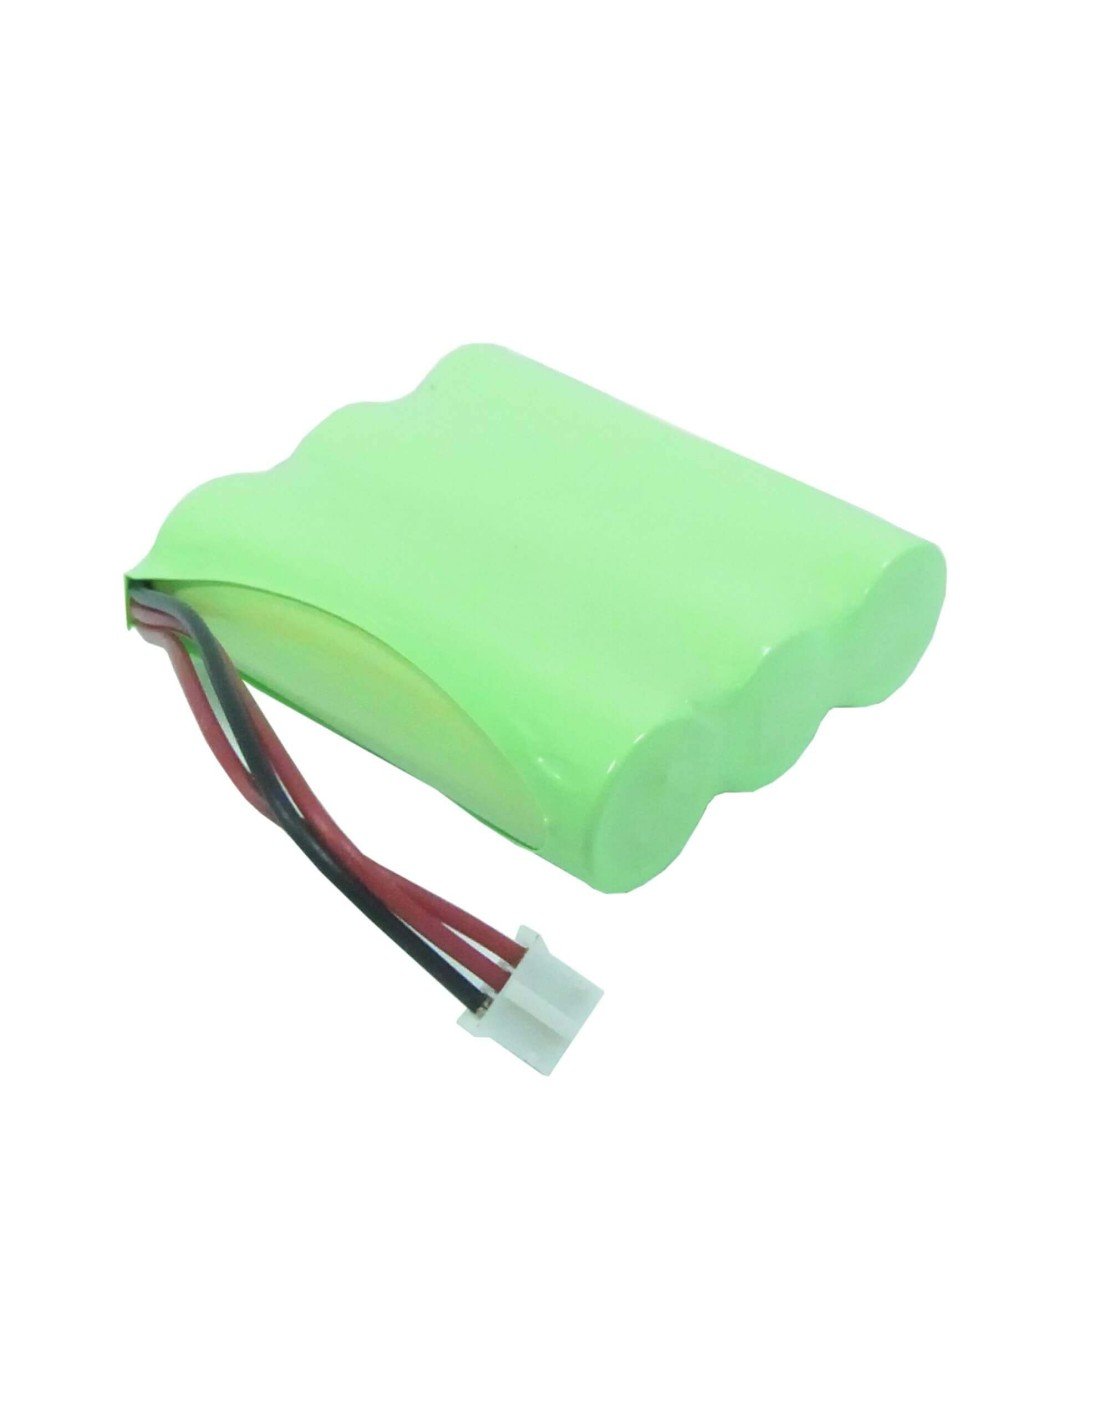 Battery for Olympia, Mira Plus, Voice 3.6V, 1200mAh - 4.32Wh